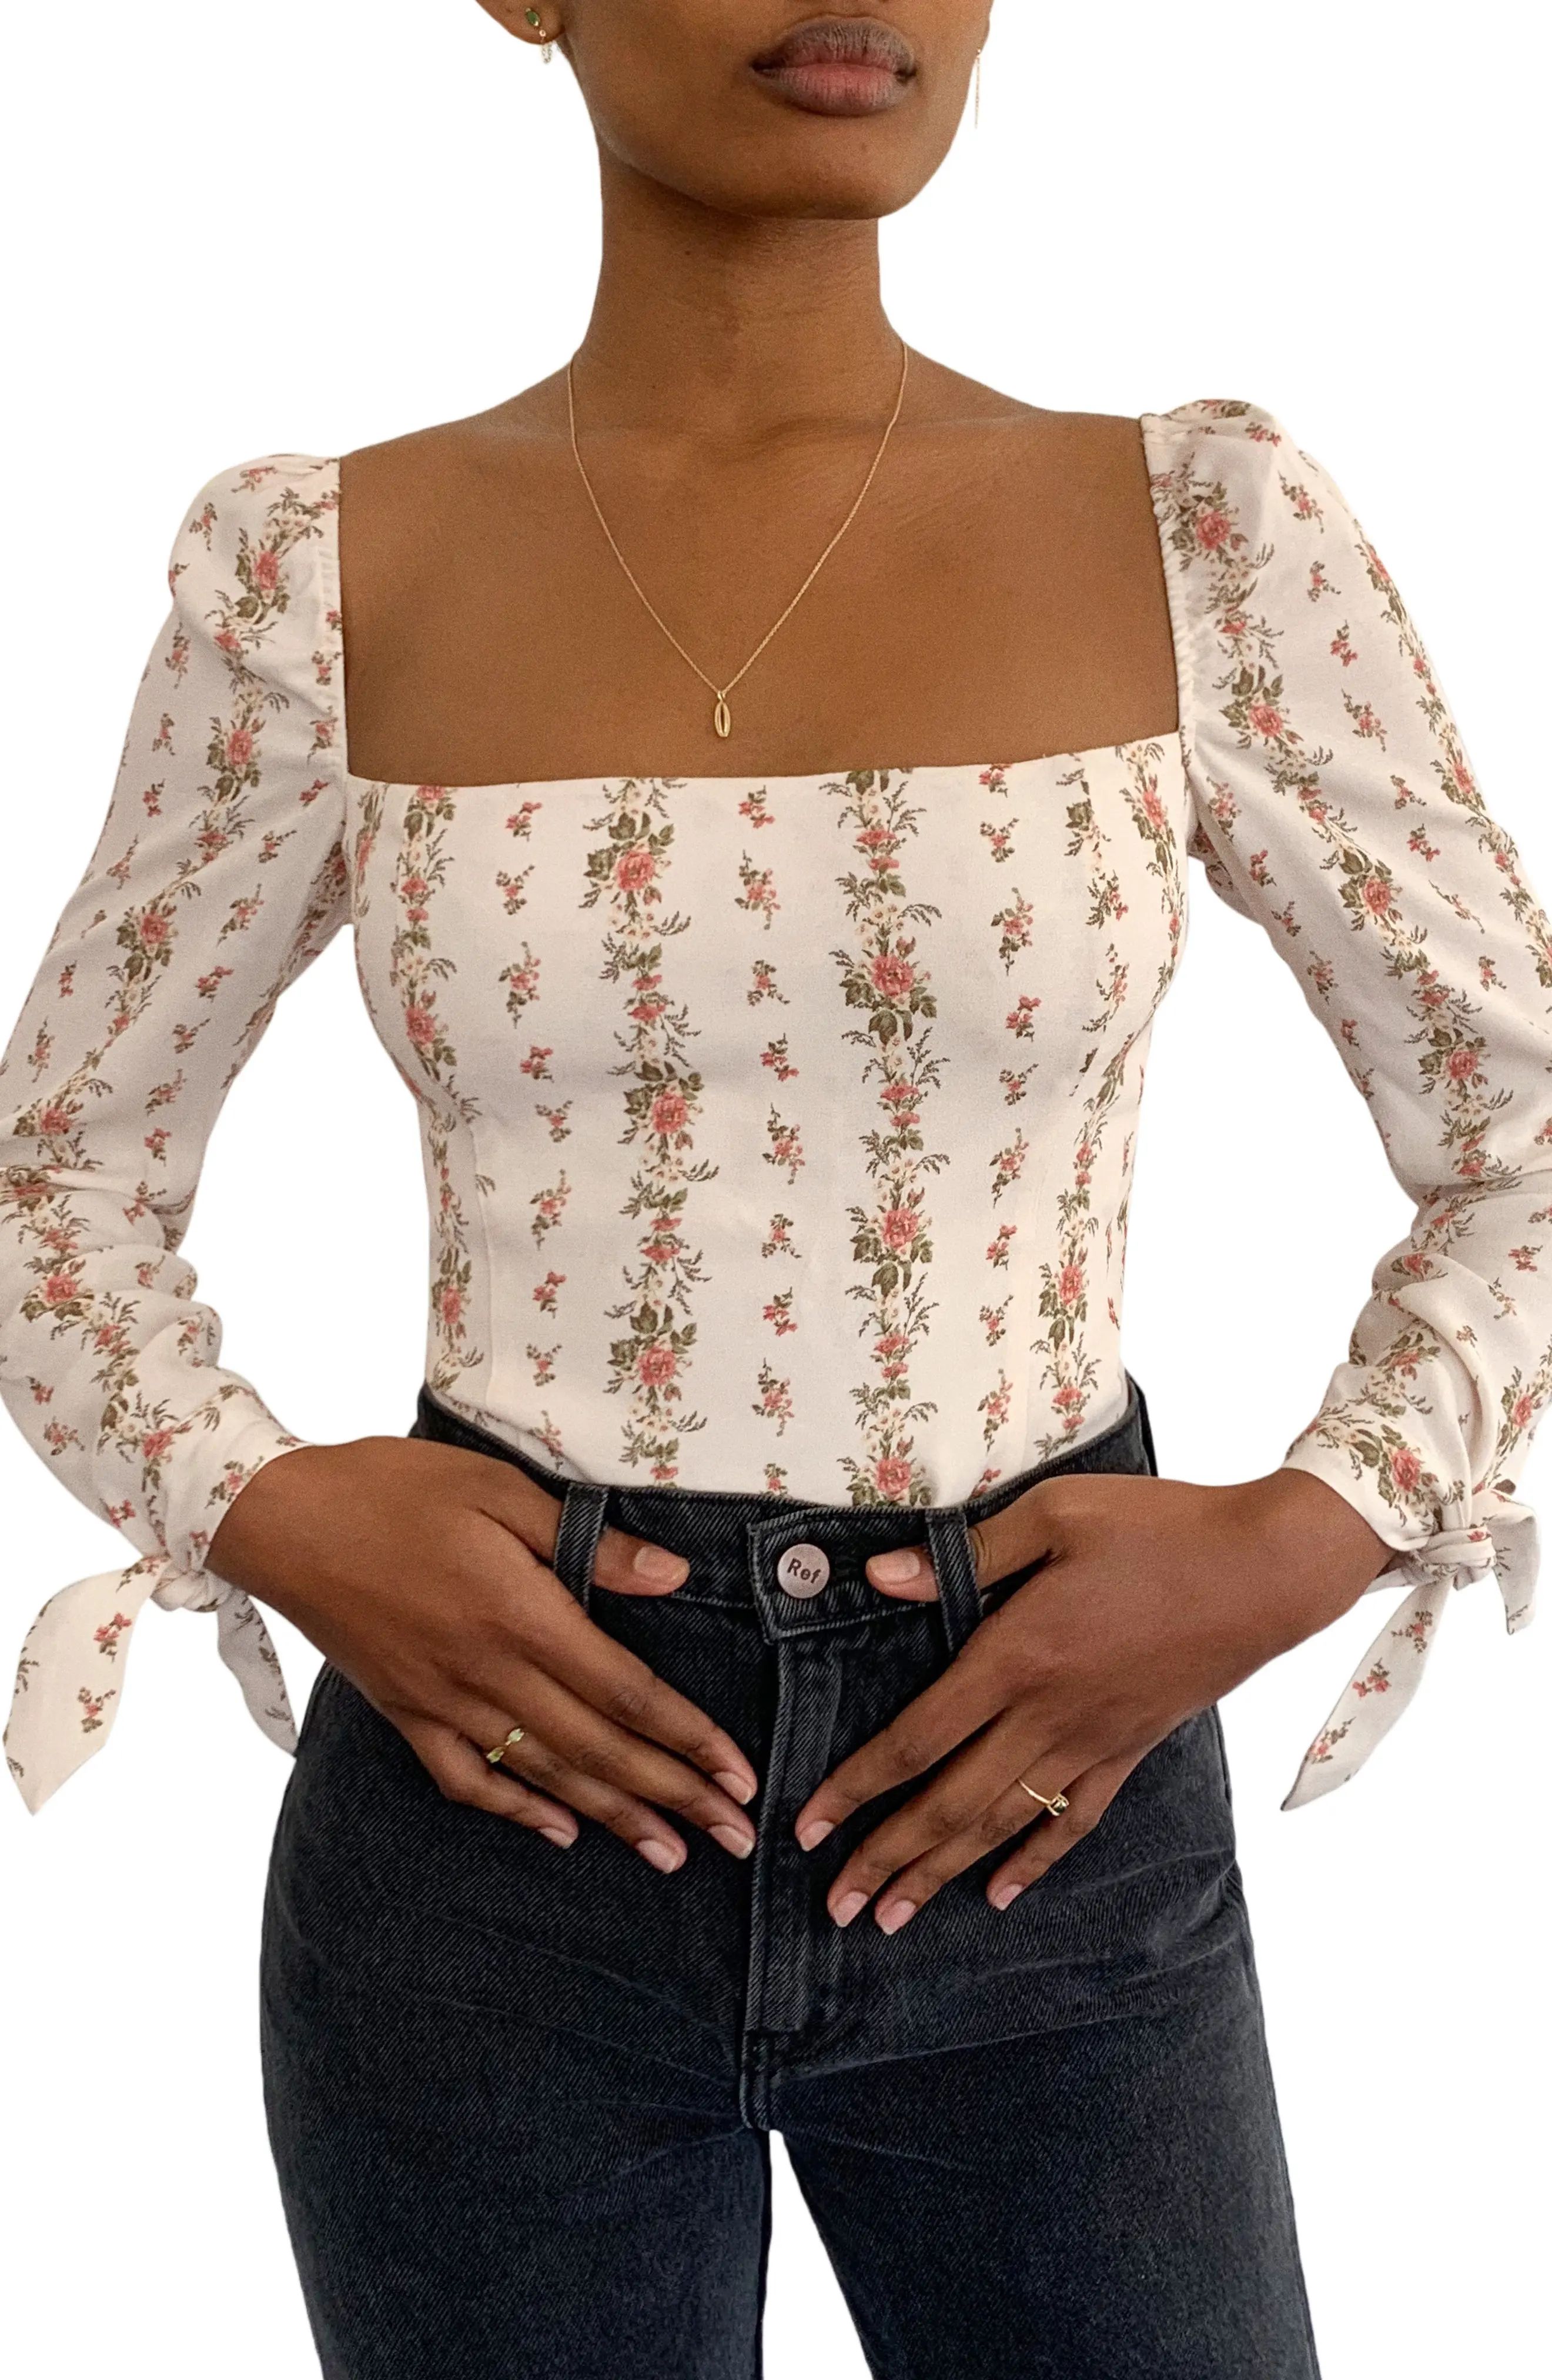 Women's Reformation Ariana Floral Blouse, Size 6 - White | Nordstrom